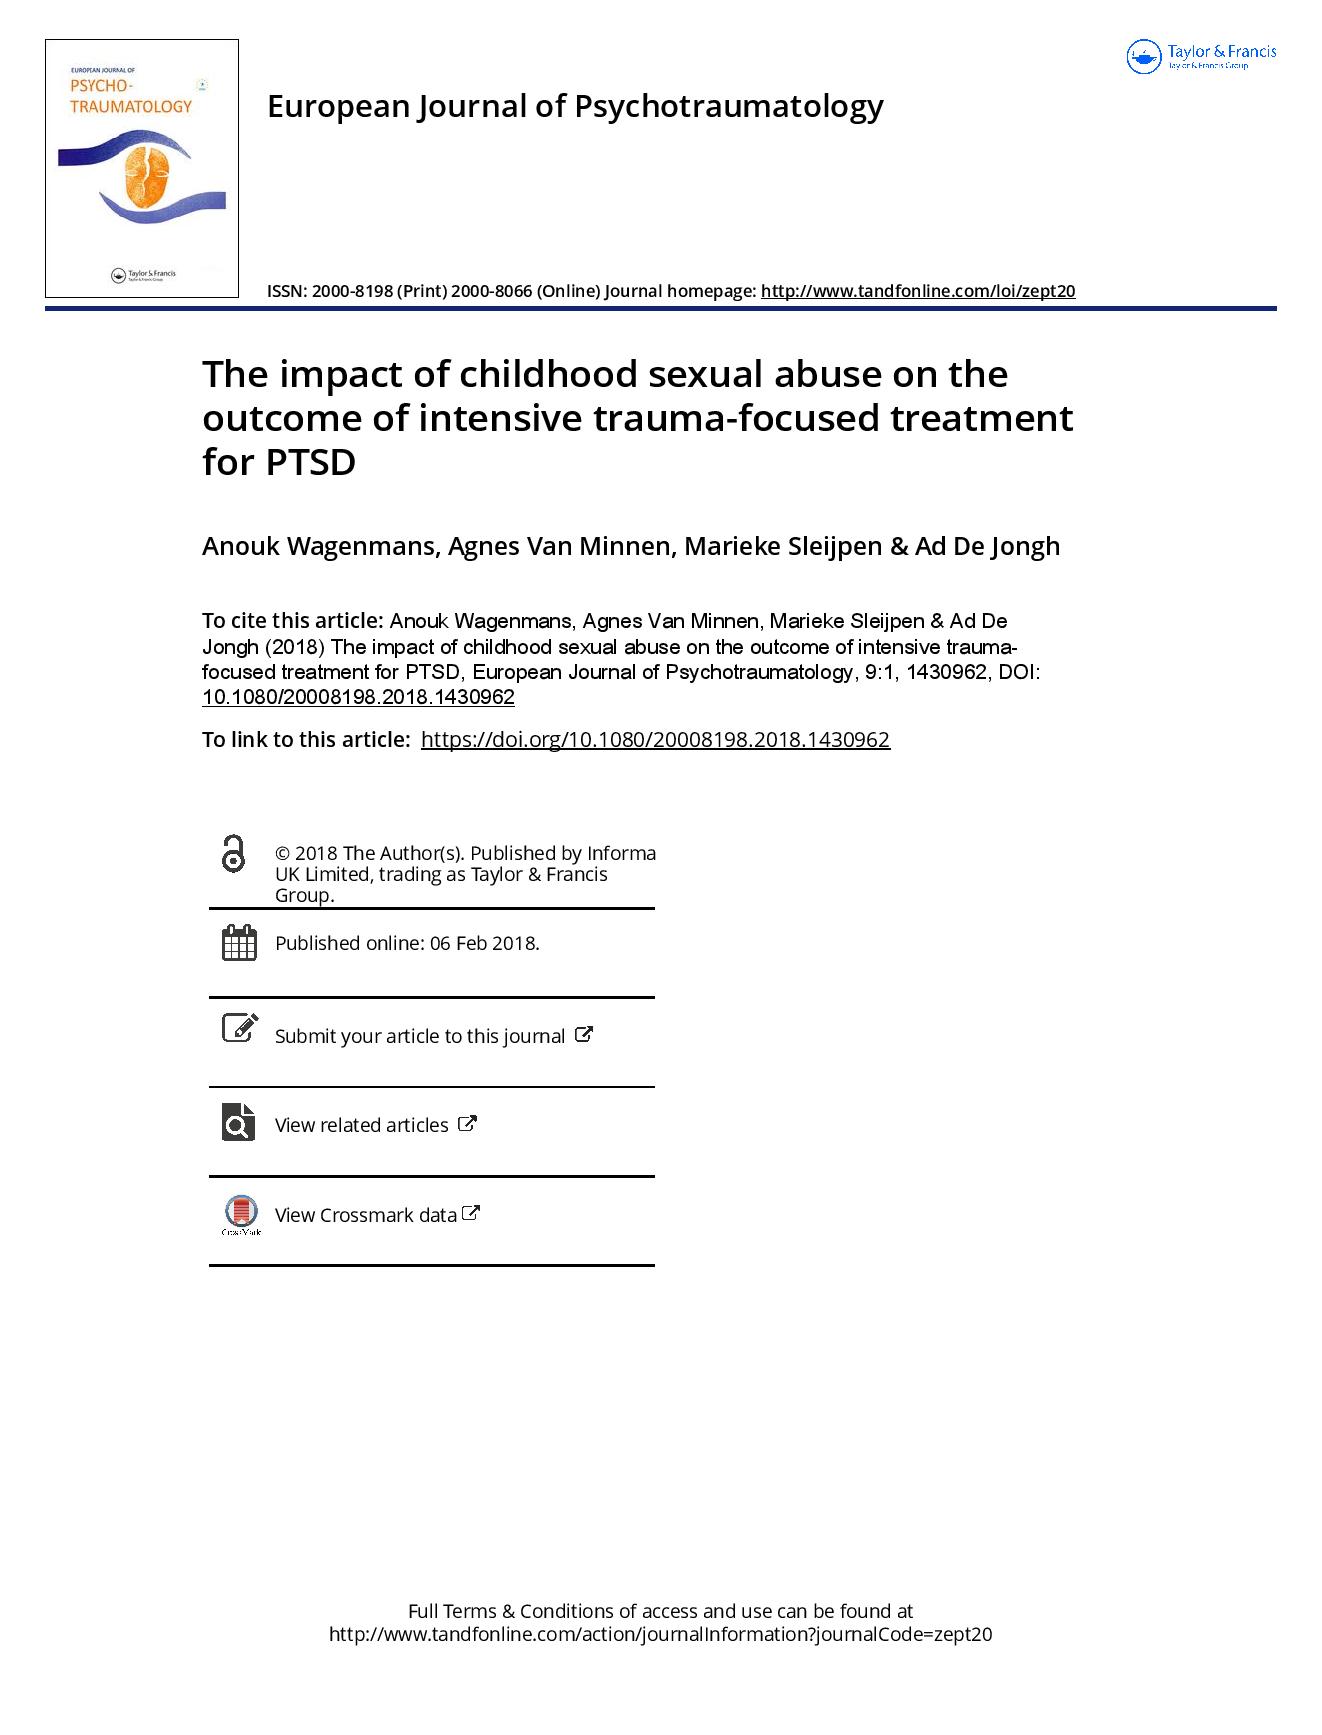 Impact of childhood sexual abuse on the outcome of ITFT for PTSD